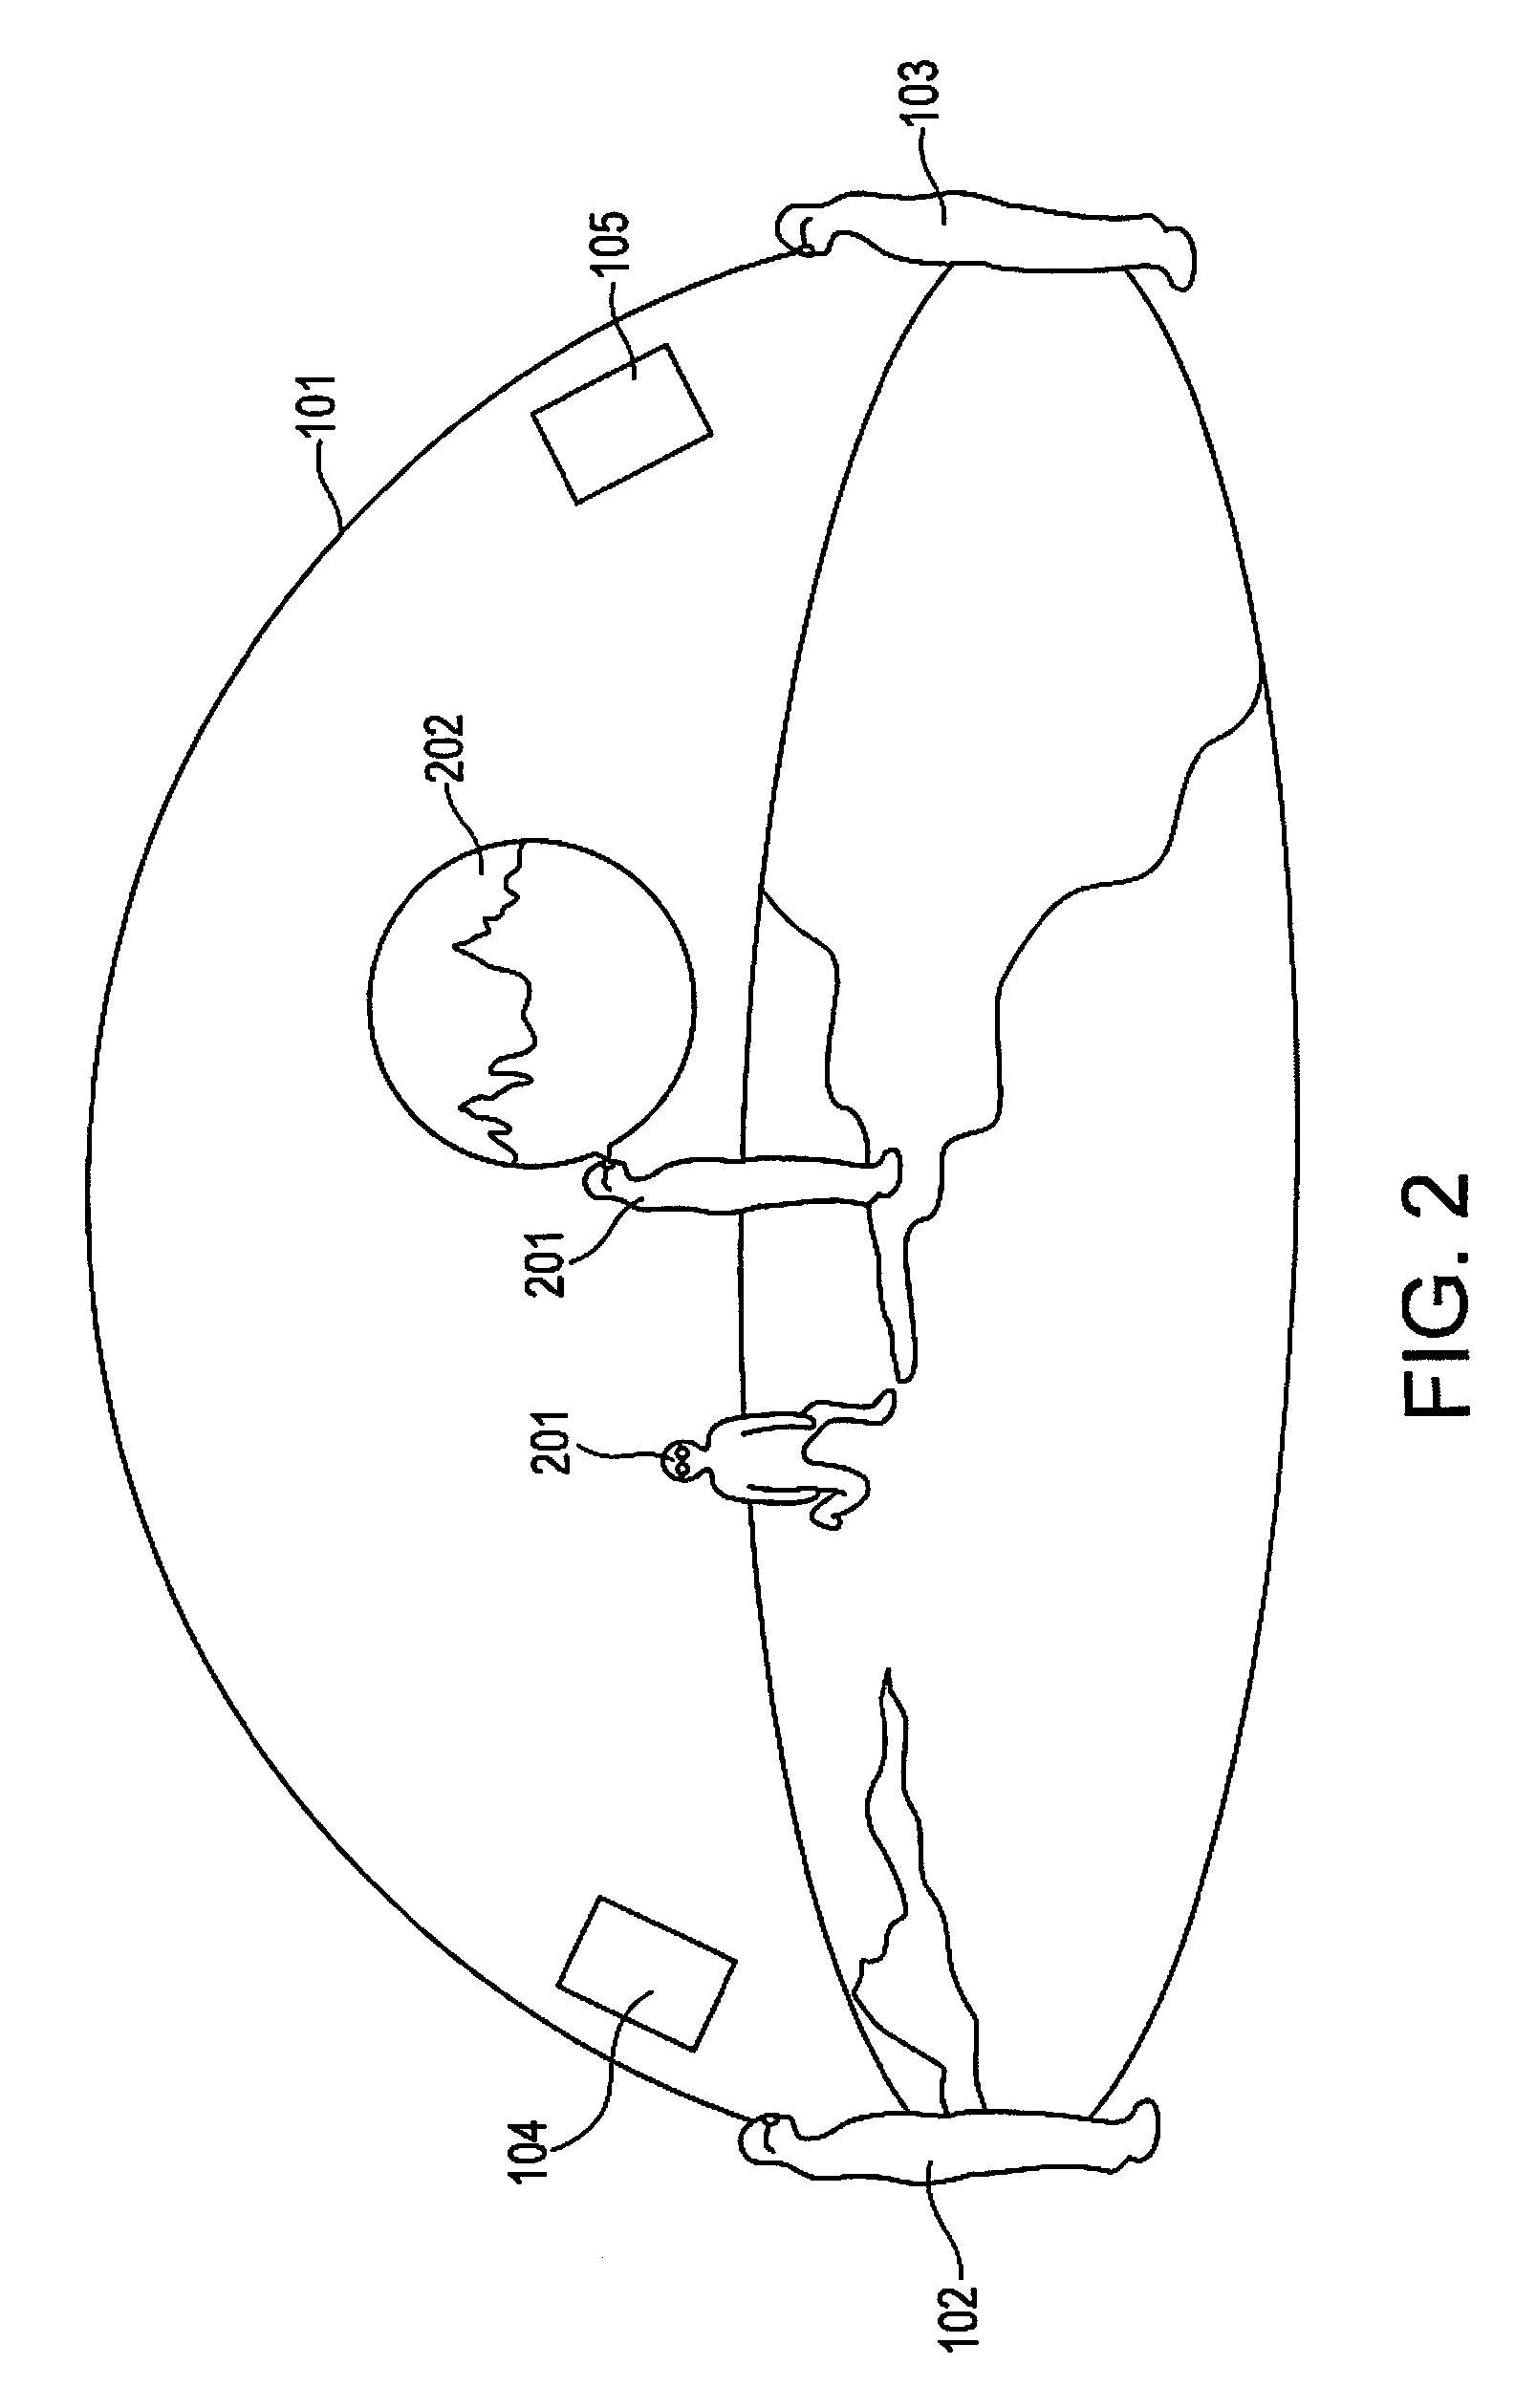 System and method for 3-dimensional display of image data